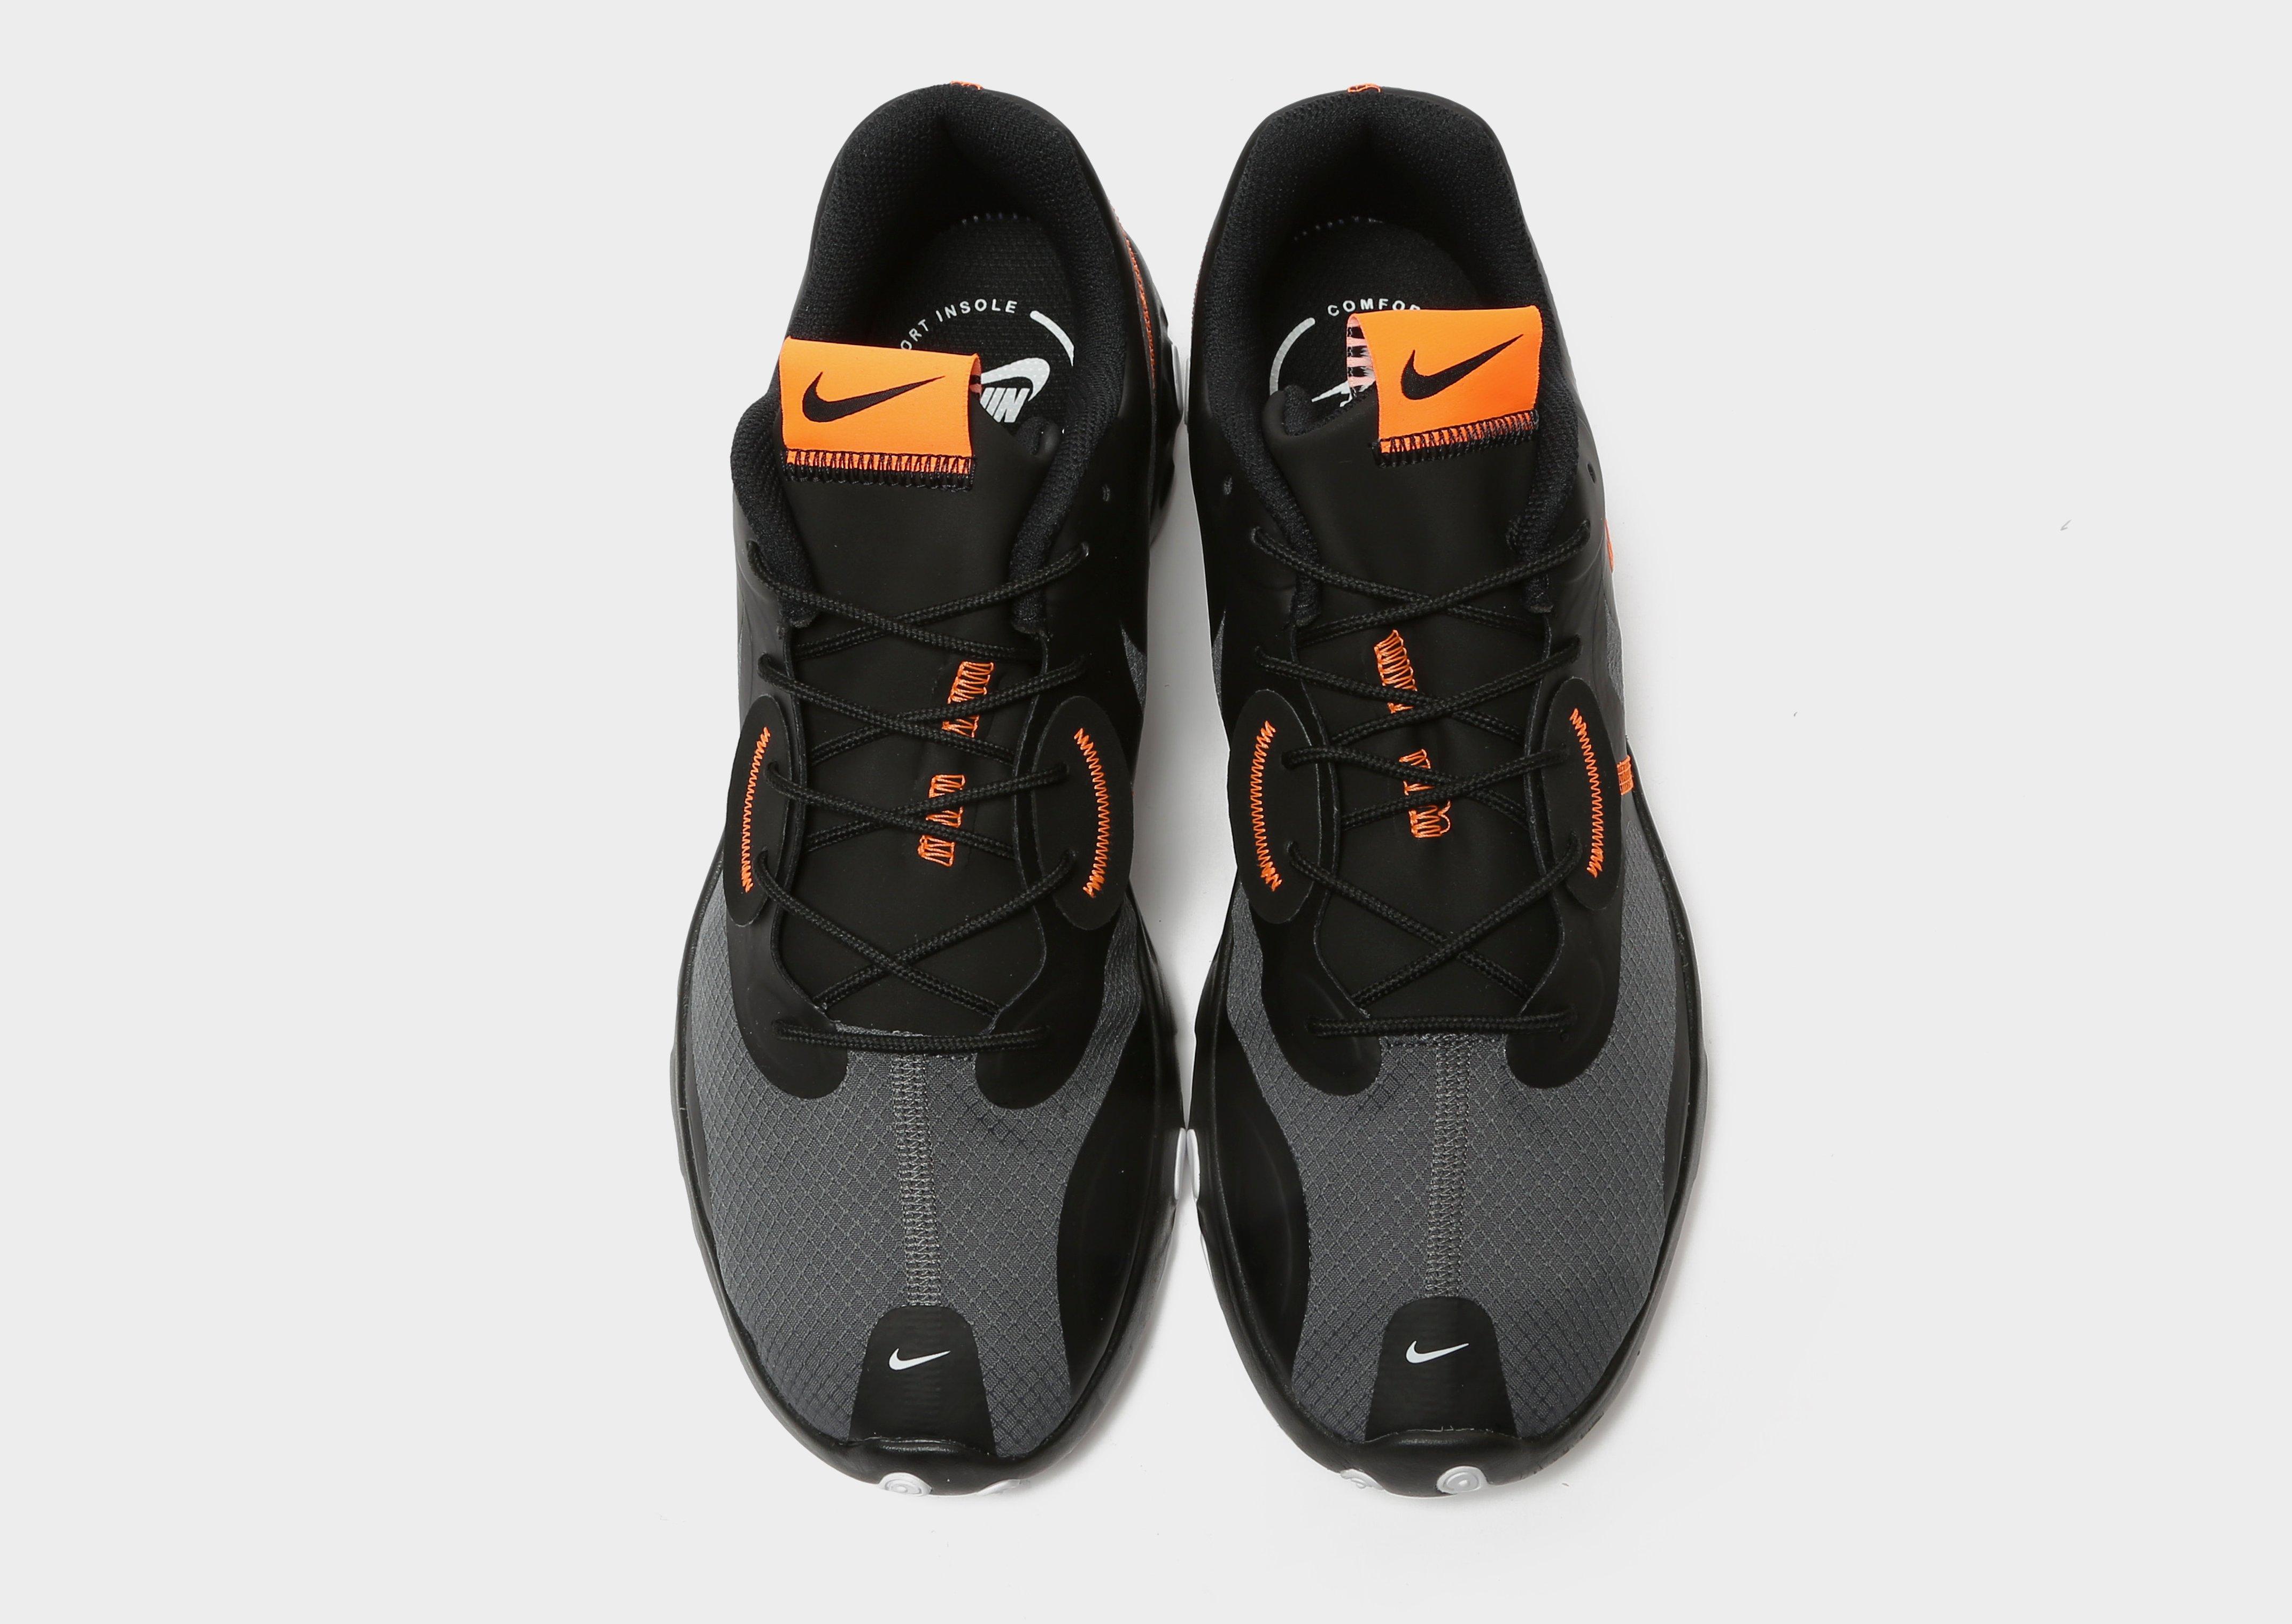 nike renew lucent trainers black